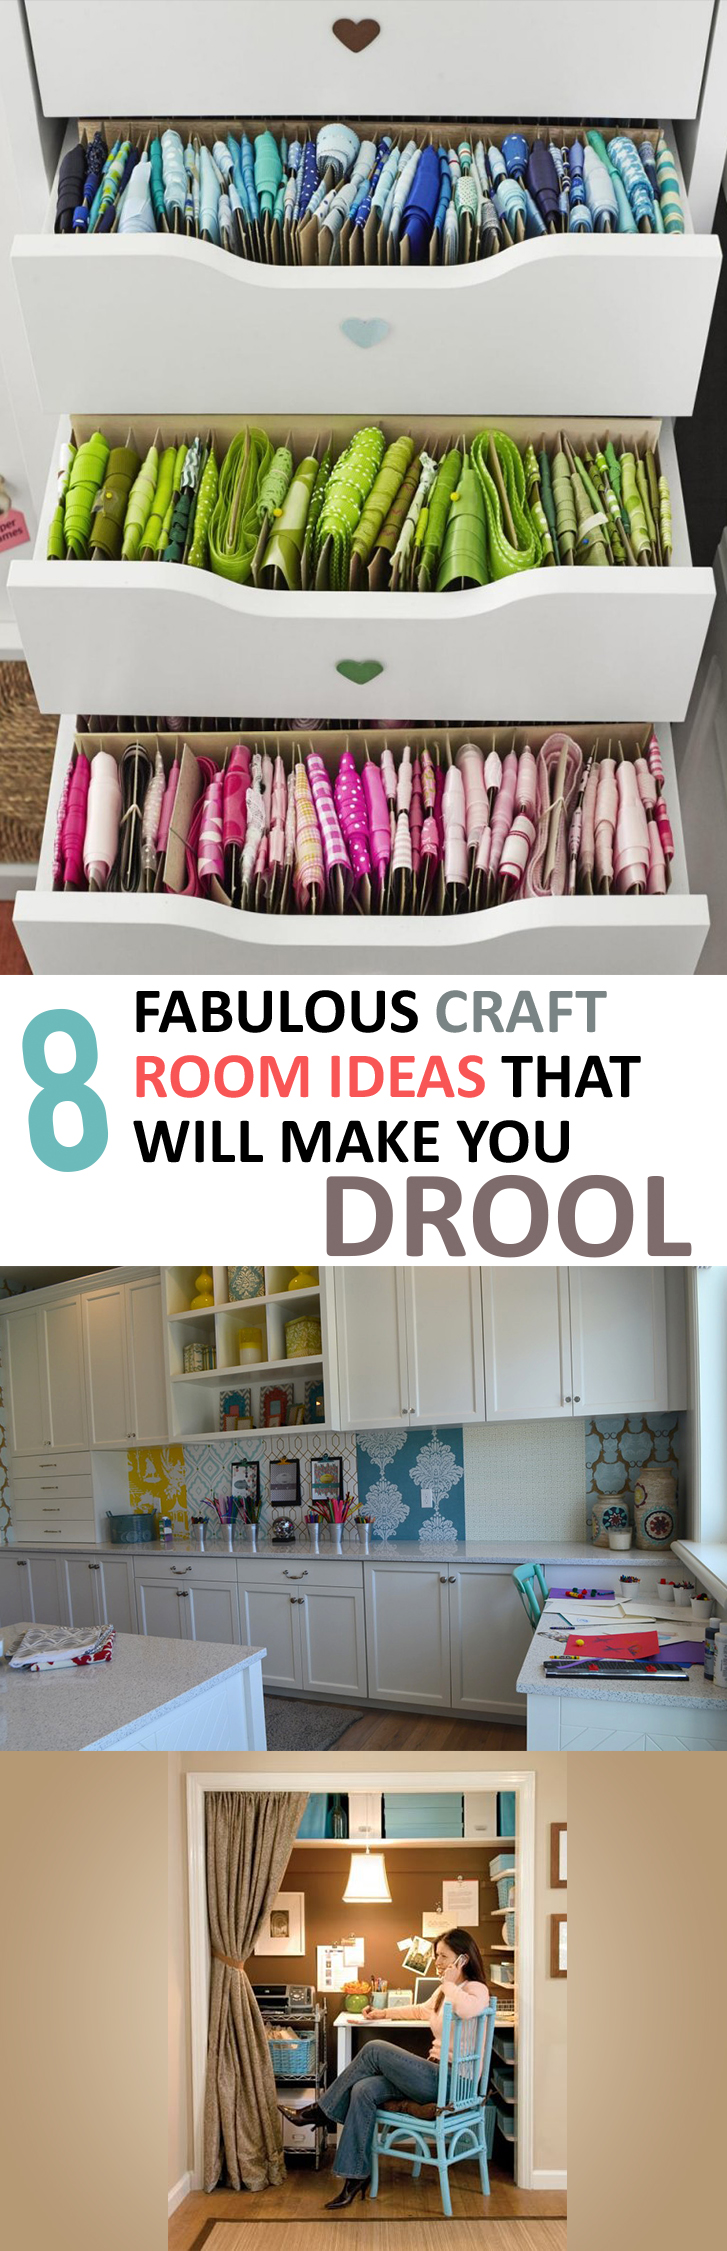 8 Fabulous Craft Room Ideas that will Make You Drool